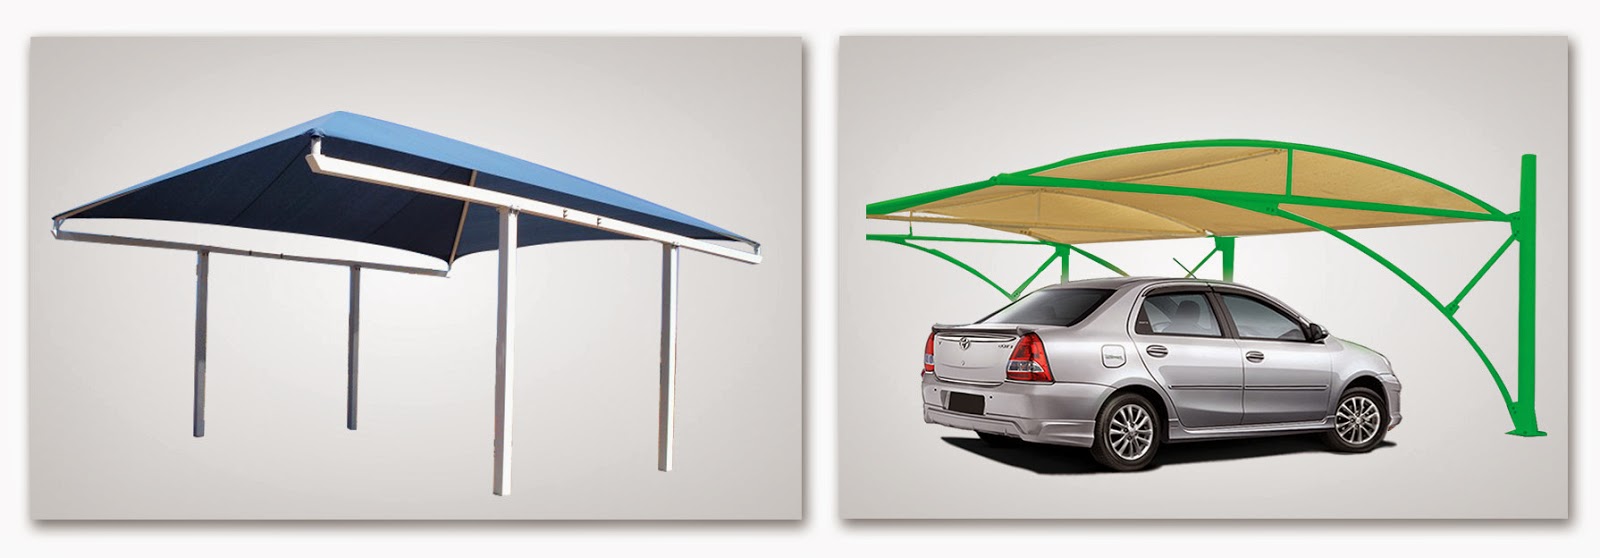 Creative Car Parking Shades Manufacturing and Installation